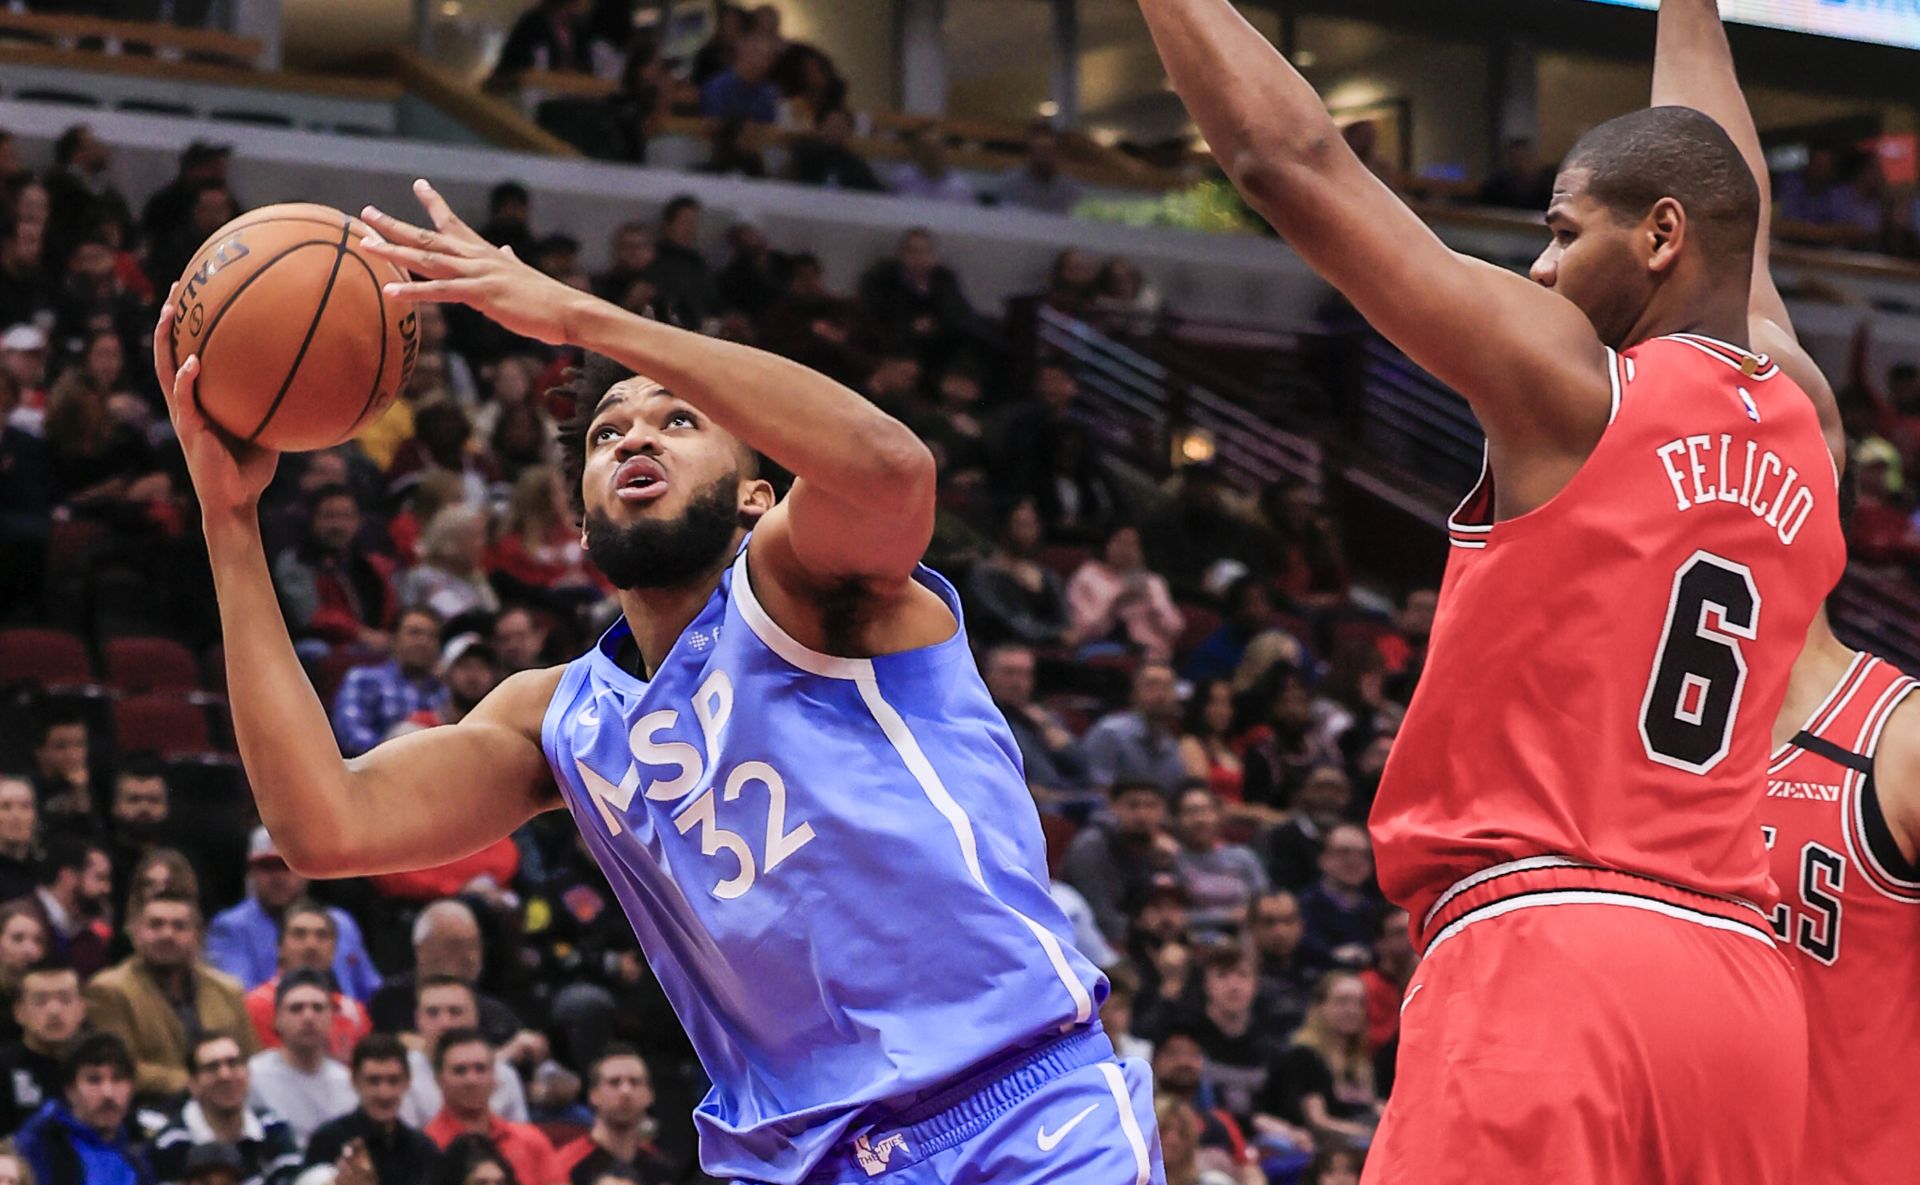 epa08153082 Minnesota Timberwolves center Karl-Anthony Towns (L) shoots on Chicago Bulls forward Cristiano Felicio (R) of Brazil during the NBA basketball game between the Minnesota Timberwolves and the Chicago Bulls at the United Center in Chicago, Illinois, USA, 22 January 2020.  EPA/TANNEN MAURY SHUTTERSTOCK OUT